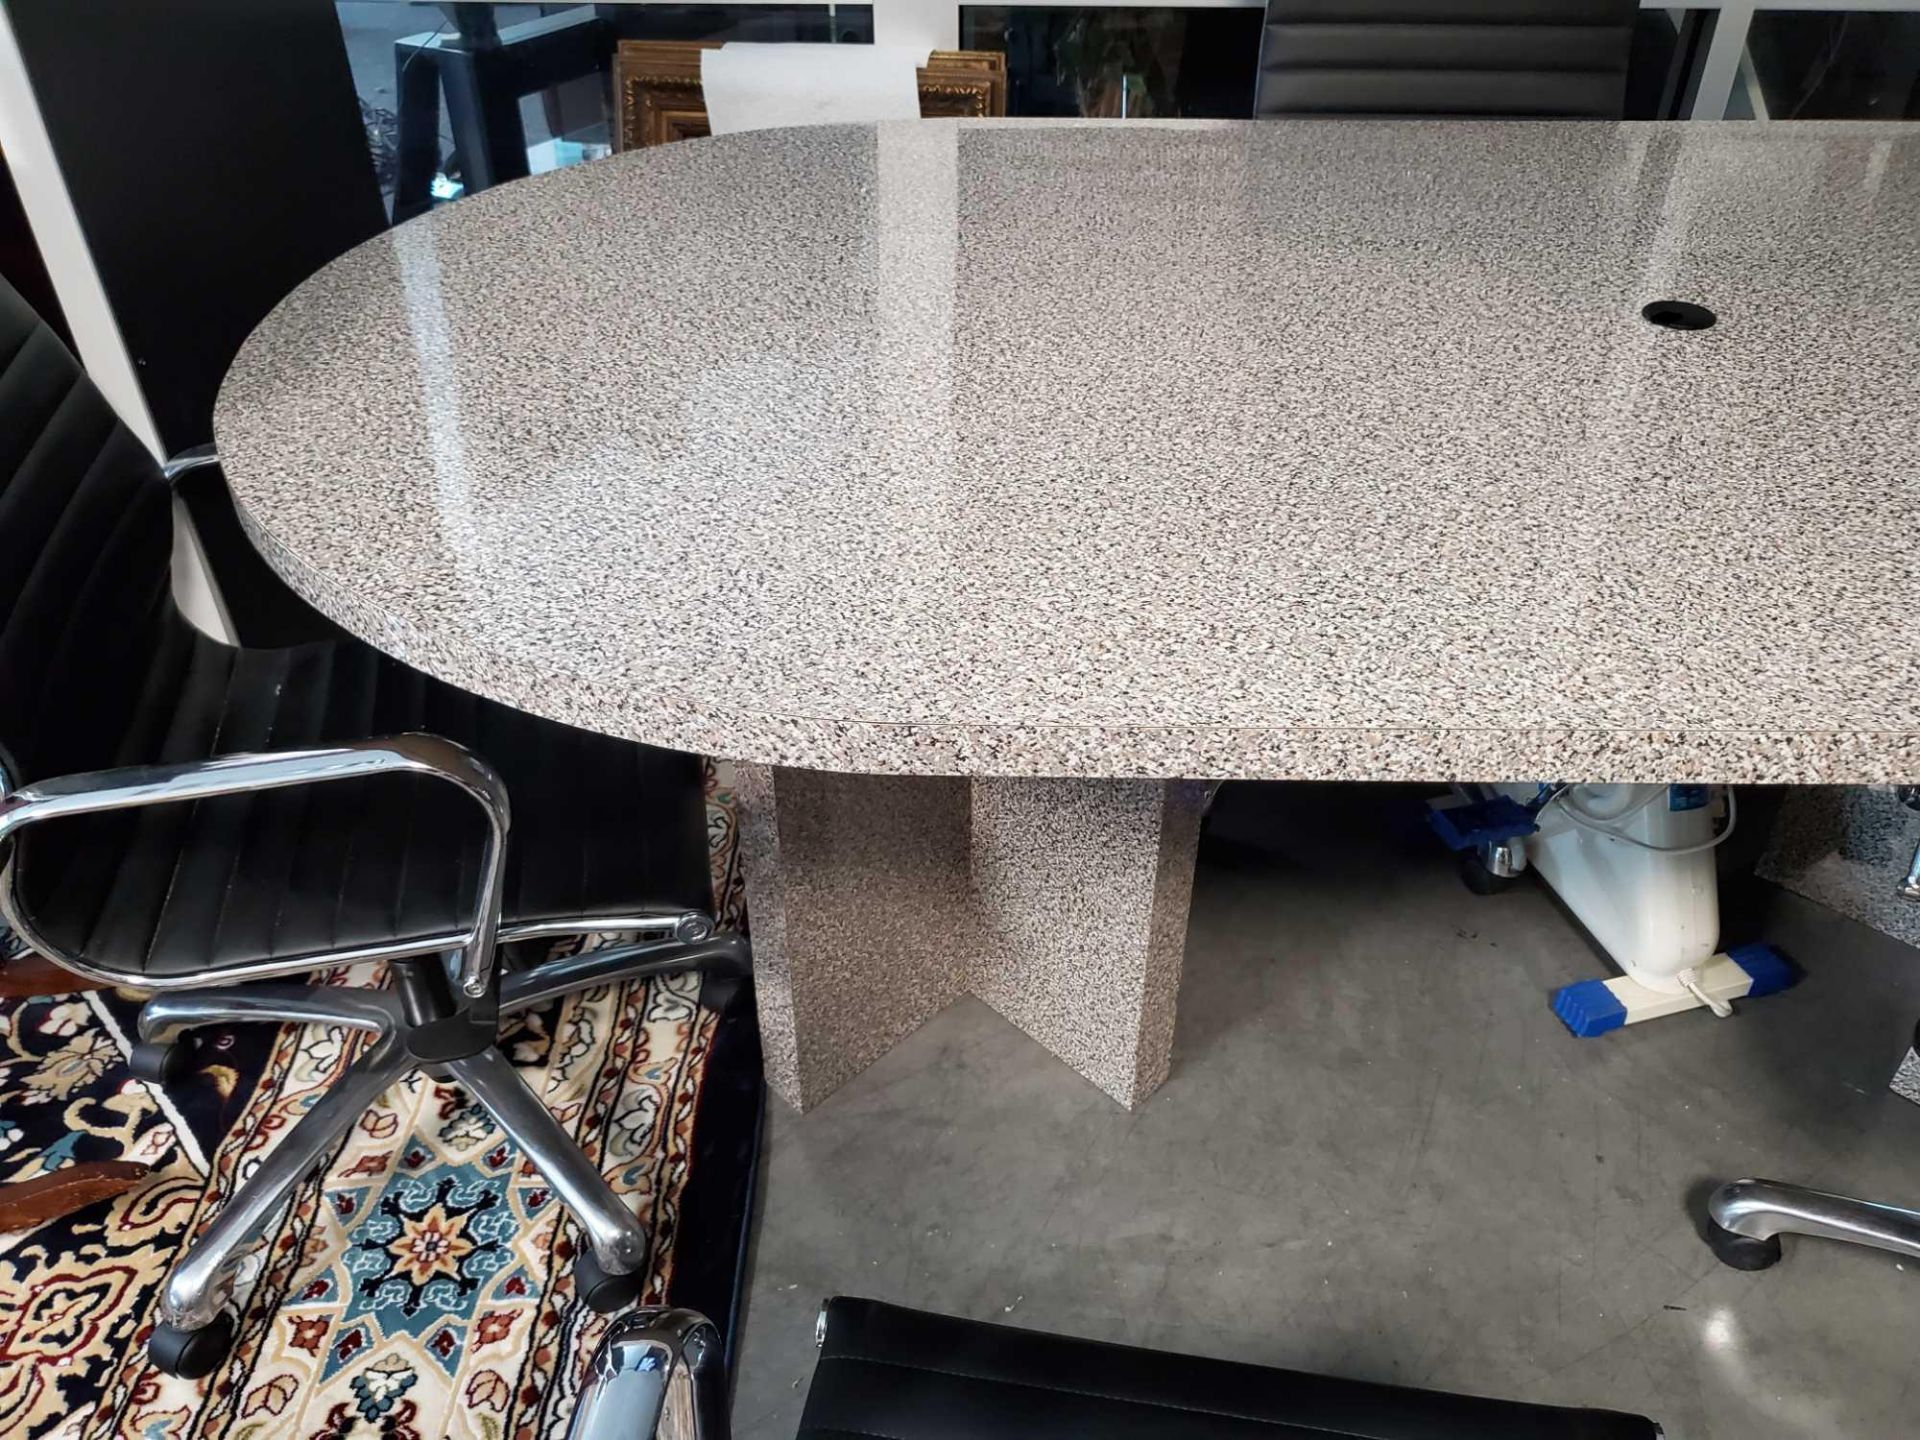 8' CONFERENCE TABLE WITH 4 LEATHER CHAIRS MODEL 10811KT - Image 3 of 6